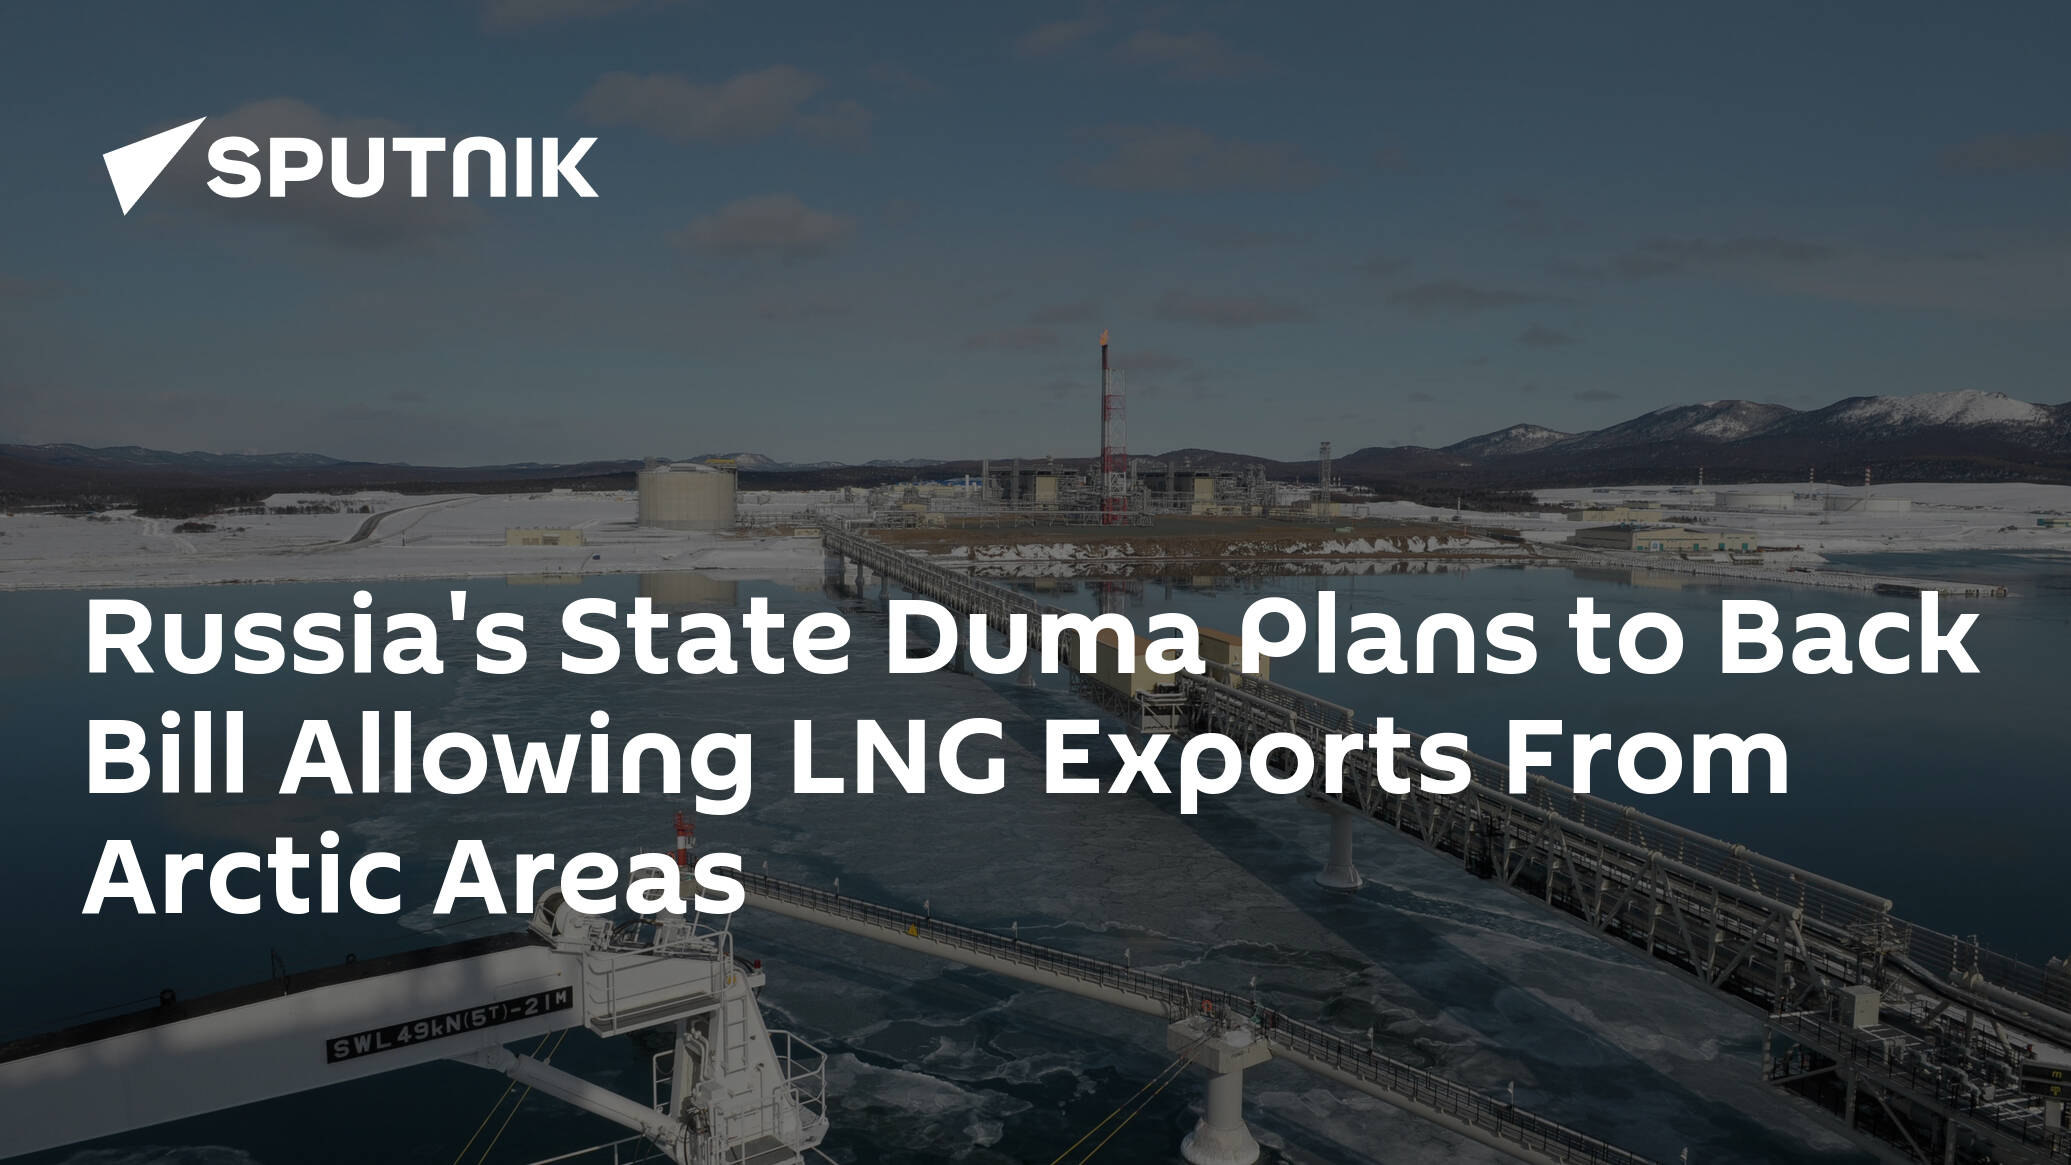 Russia's State Duma Plans to Back Bill Allowing LNG Exports From Arctic Areas